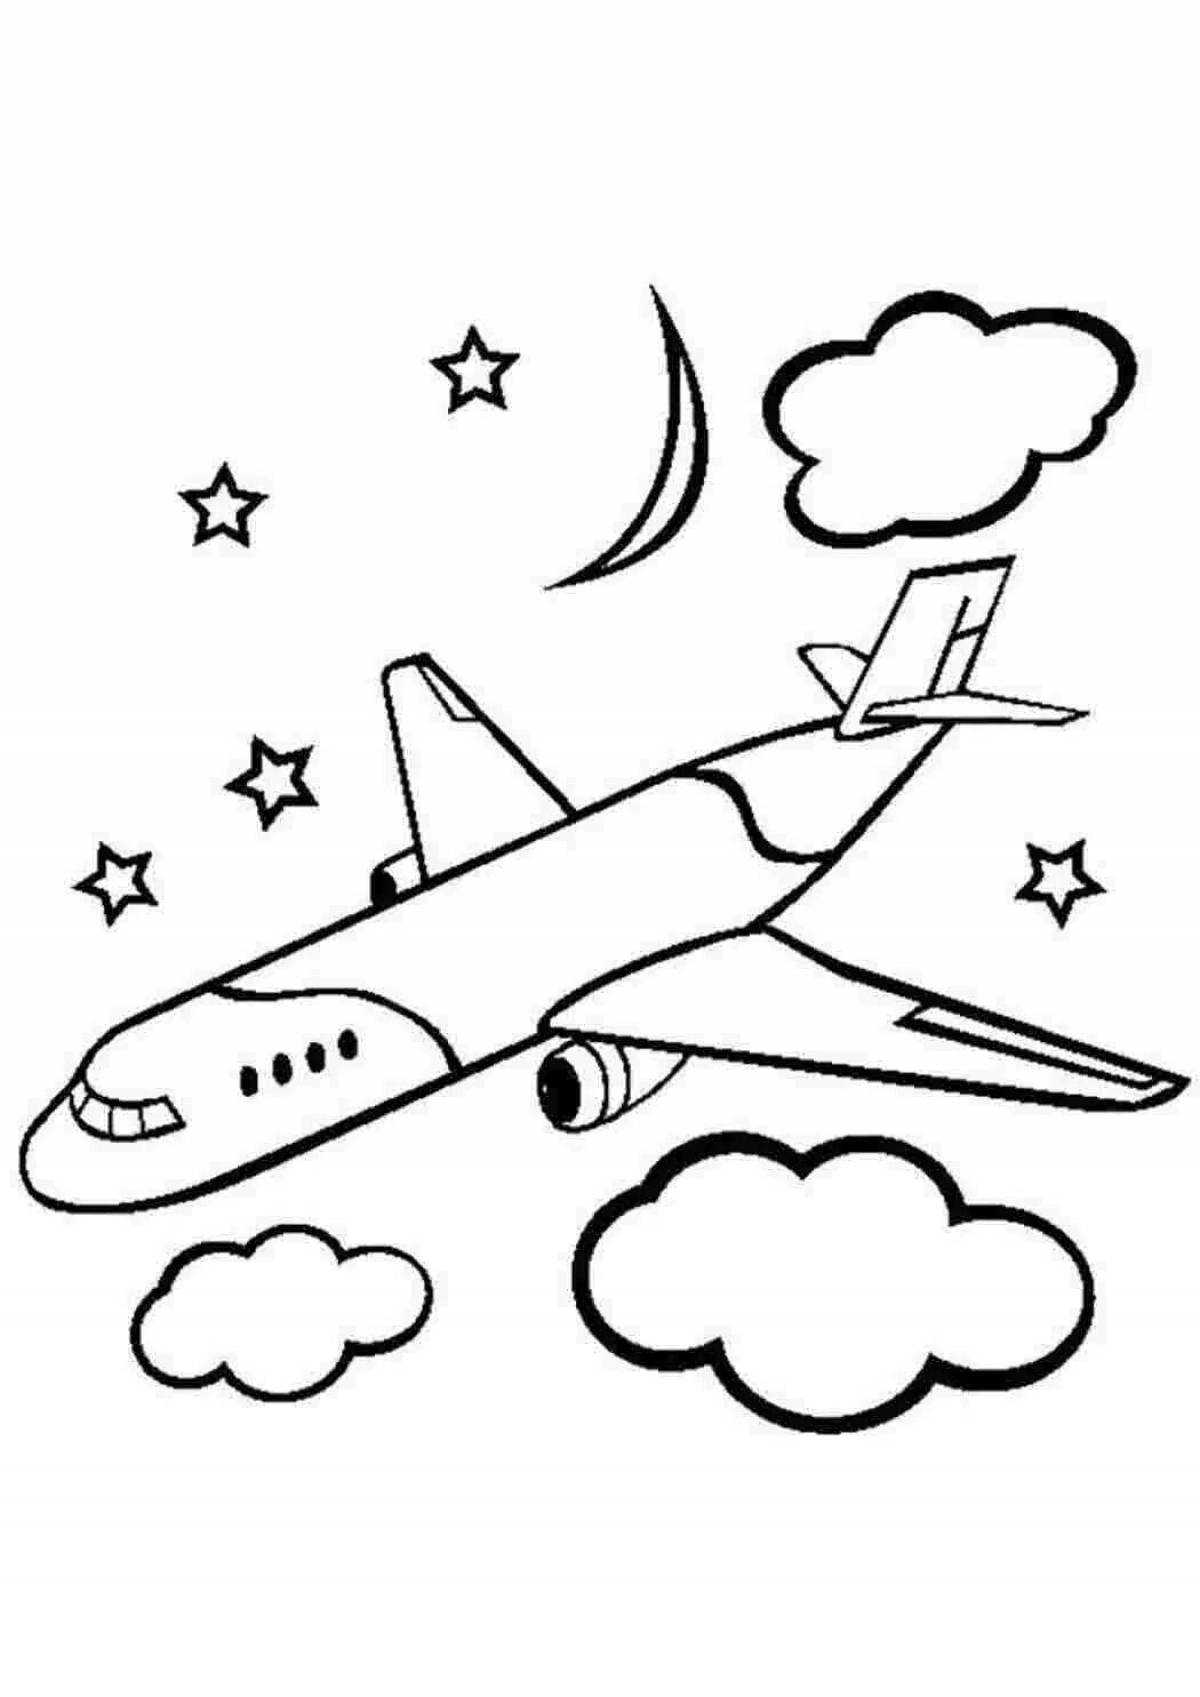 Spray airplane coloring page